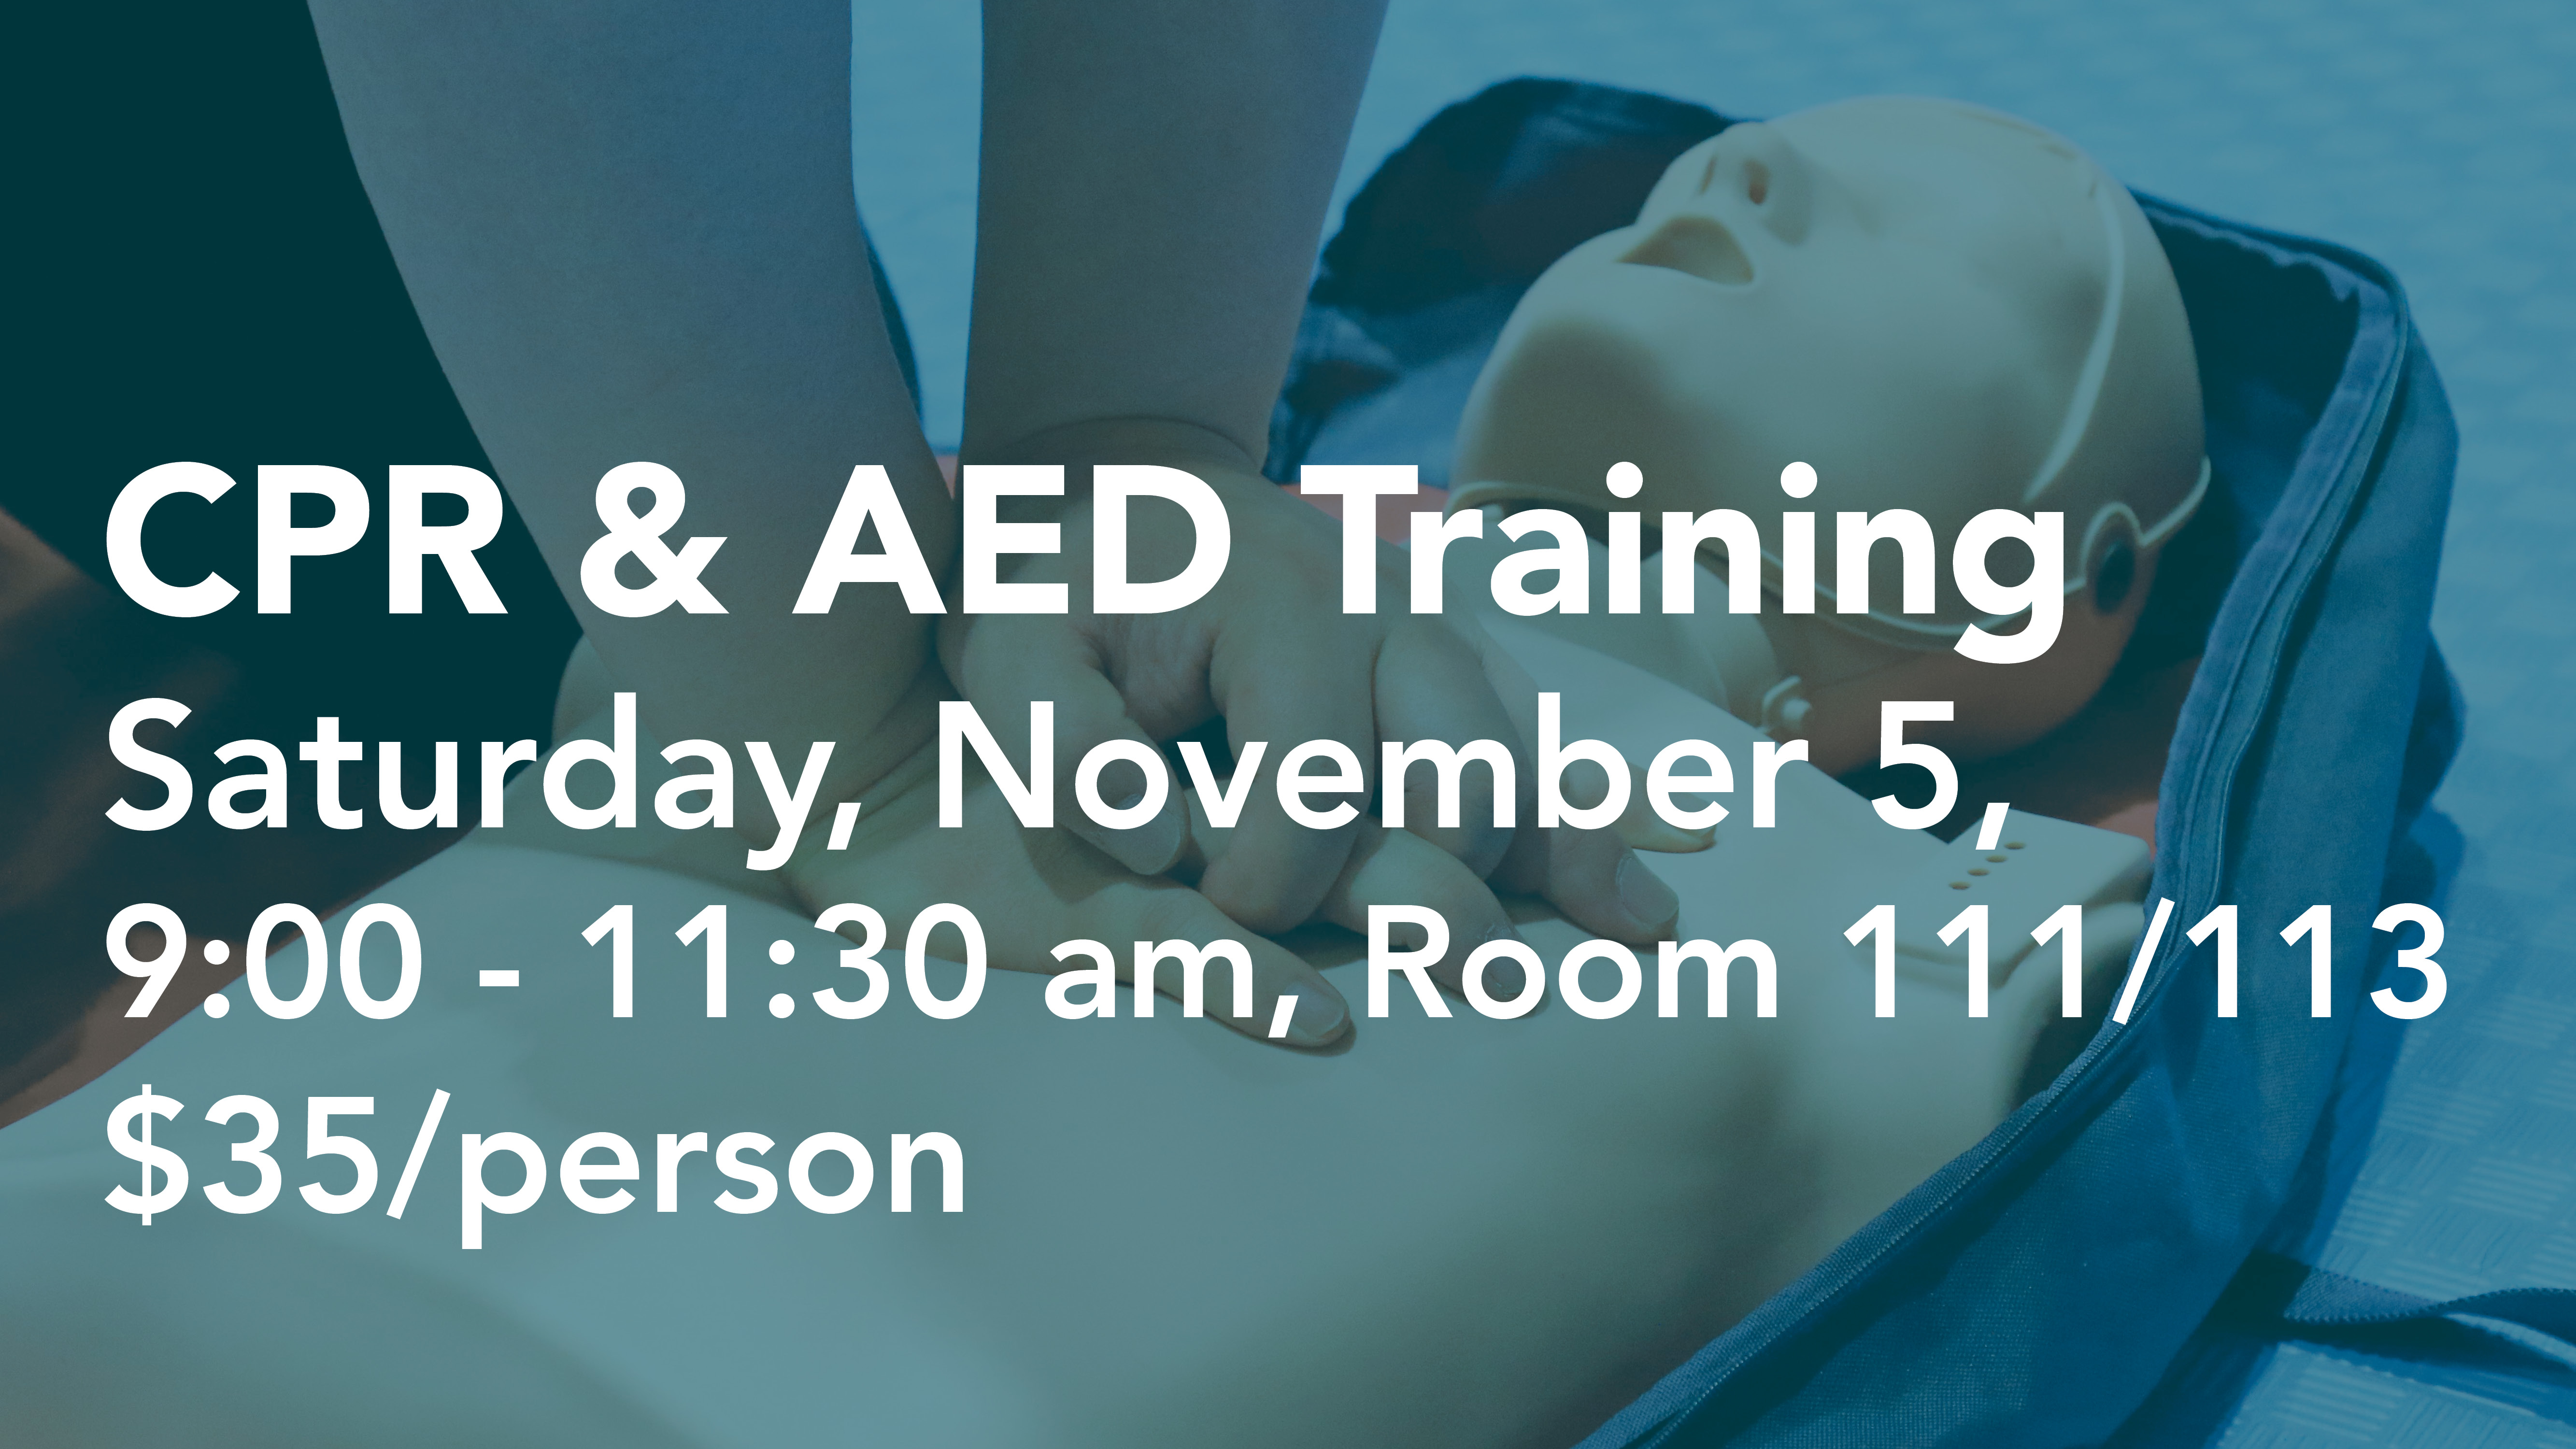 Announcement slide - CPR & AED Training